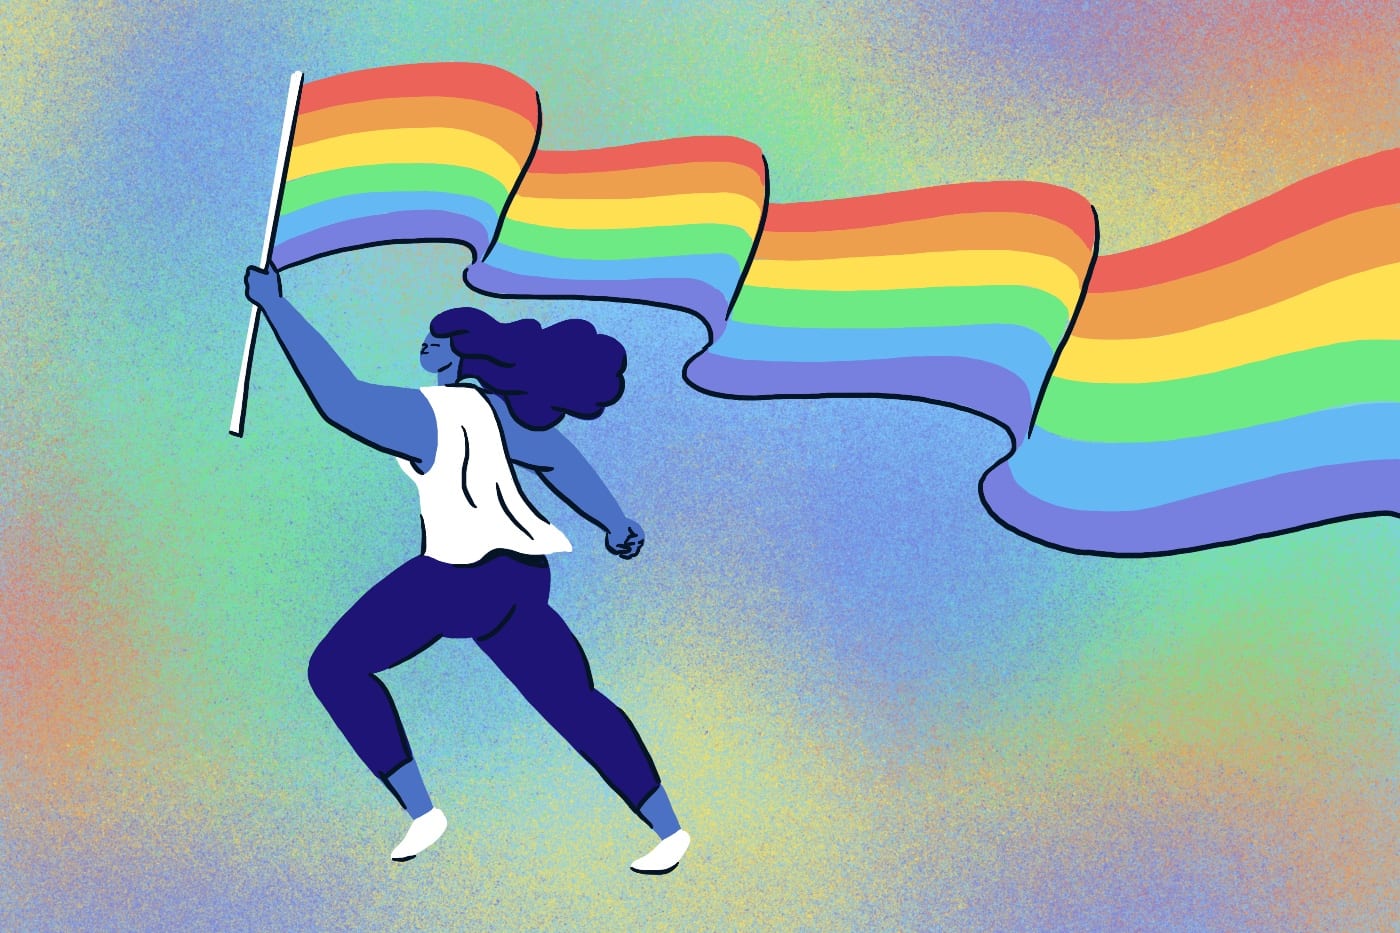 Illustration of a person waving a rainbow flag